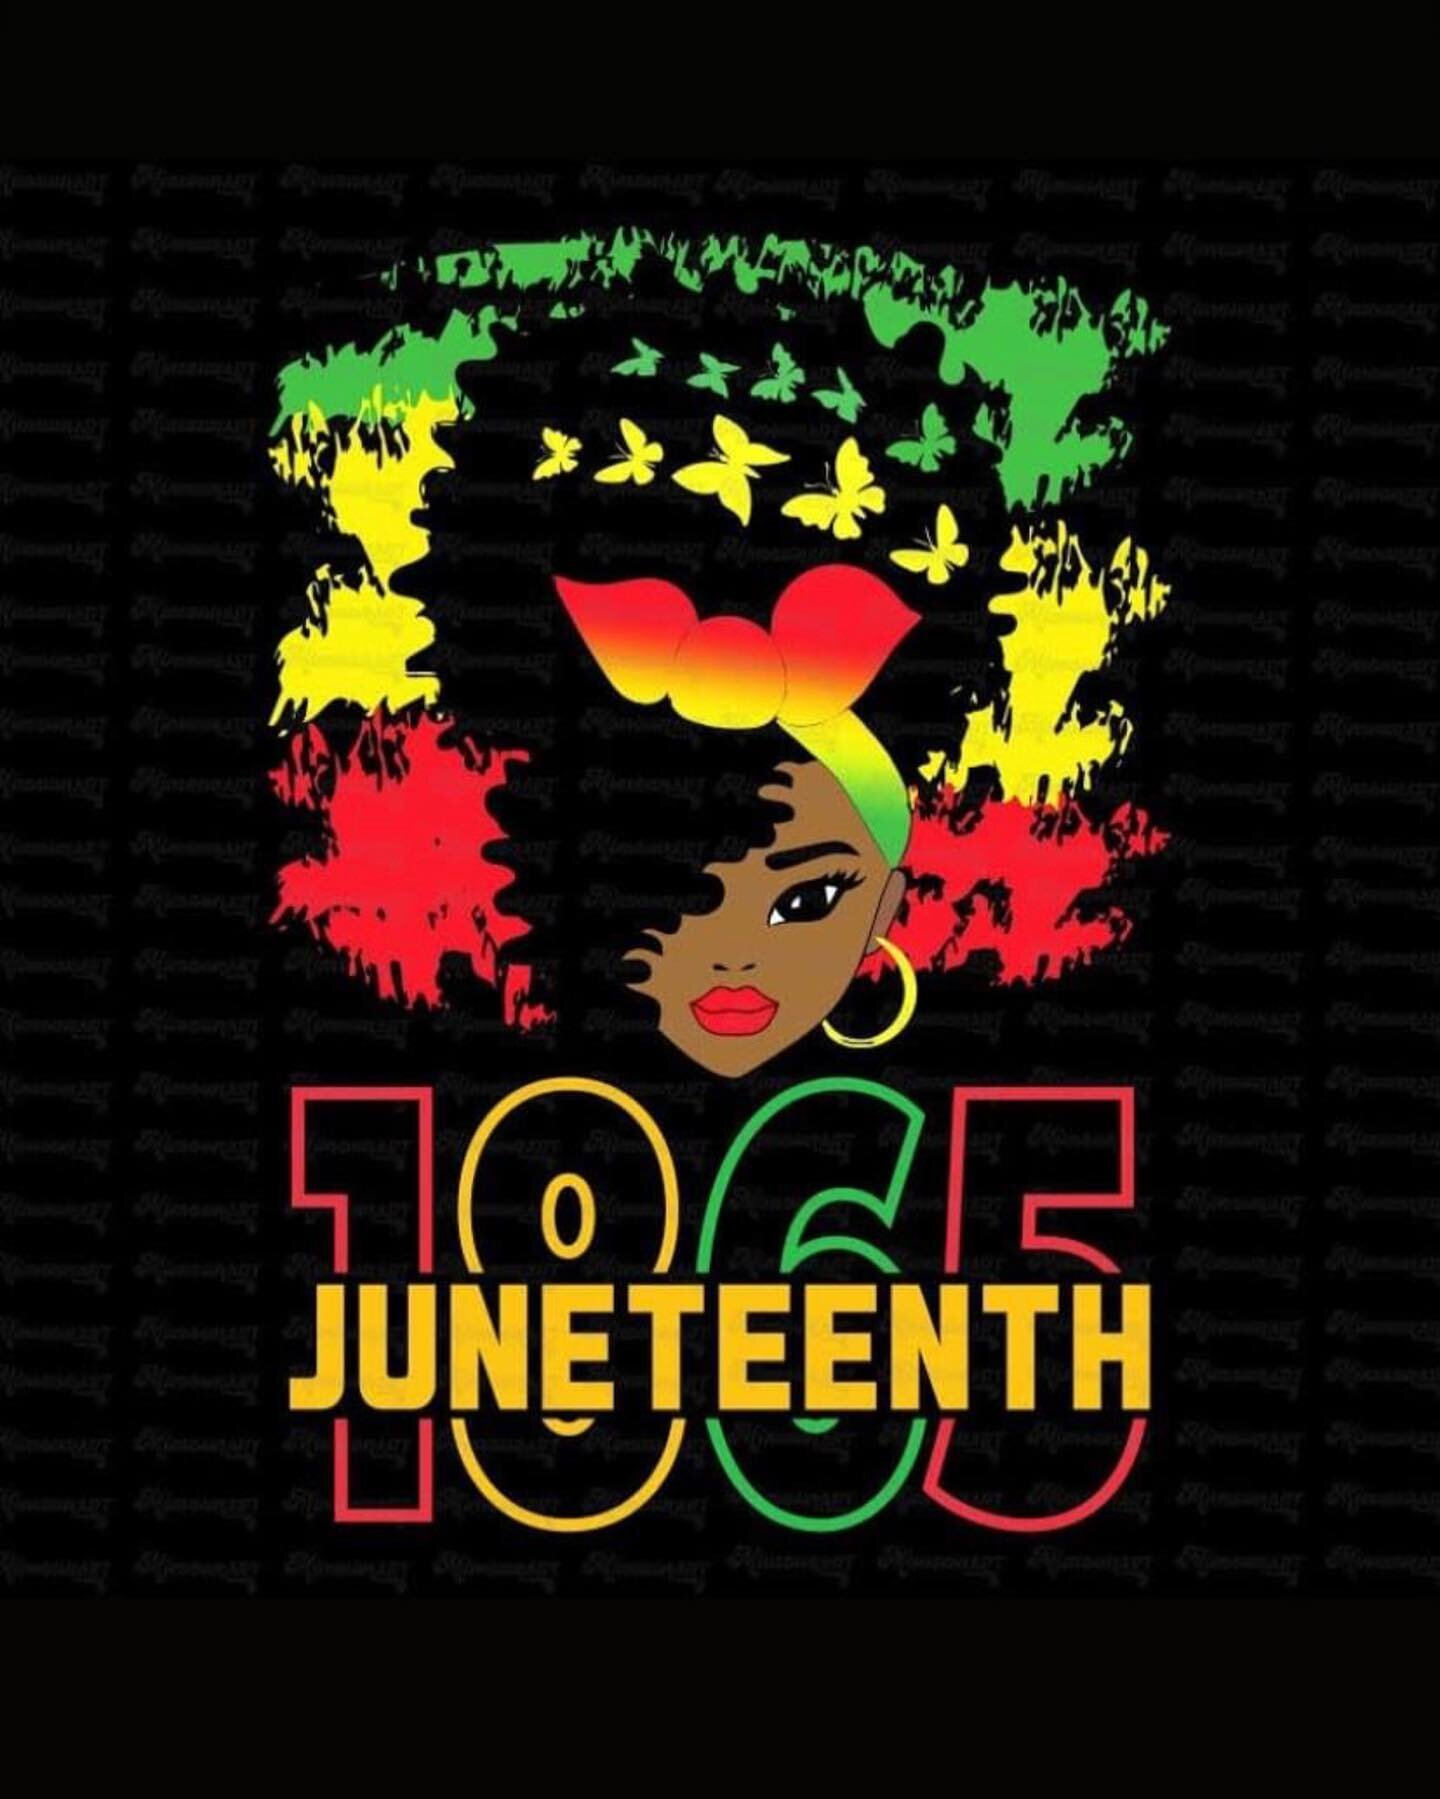 Happy father&rsquo;s day and Happy Juneteenth everyone!! ✊🏽✊🏾✊🏿